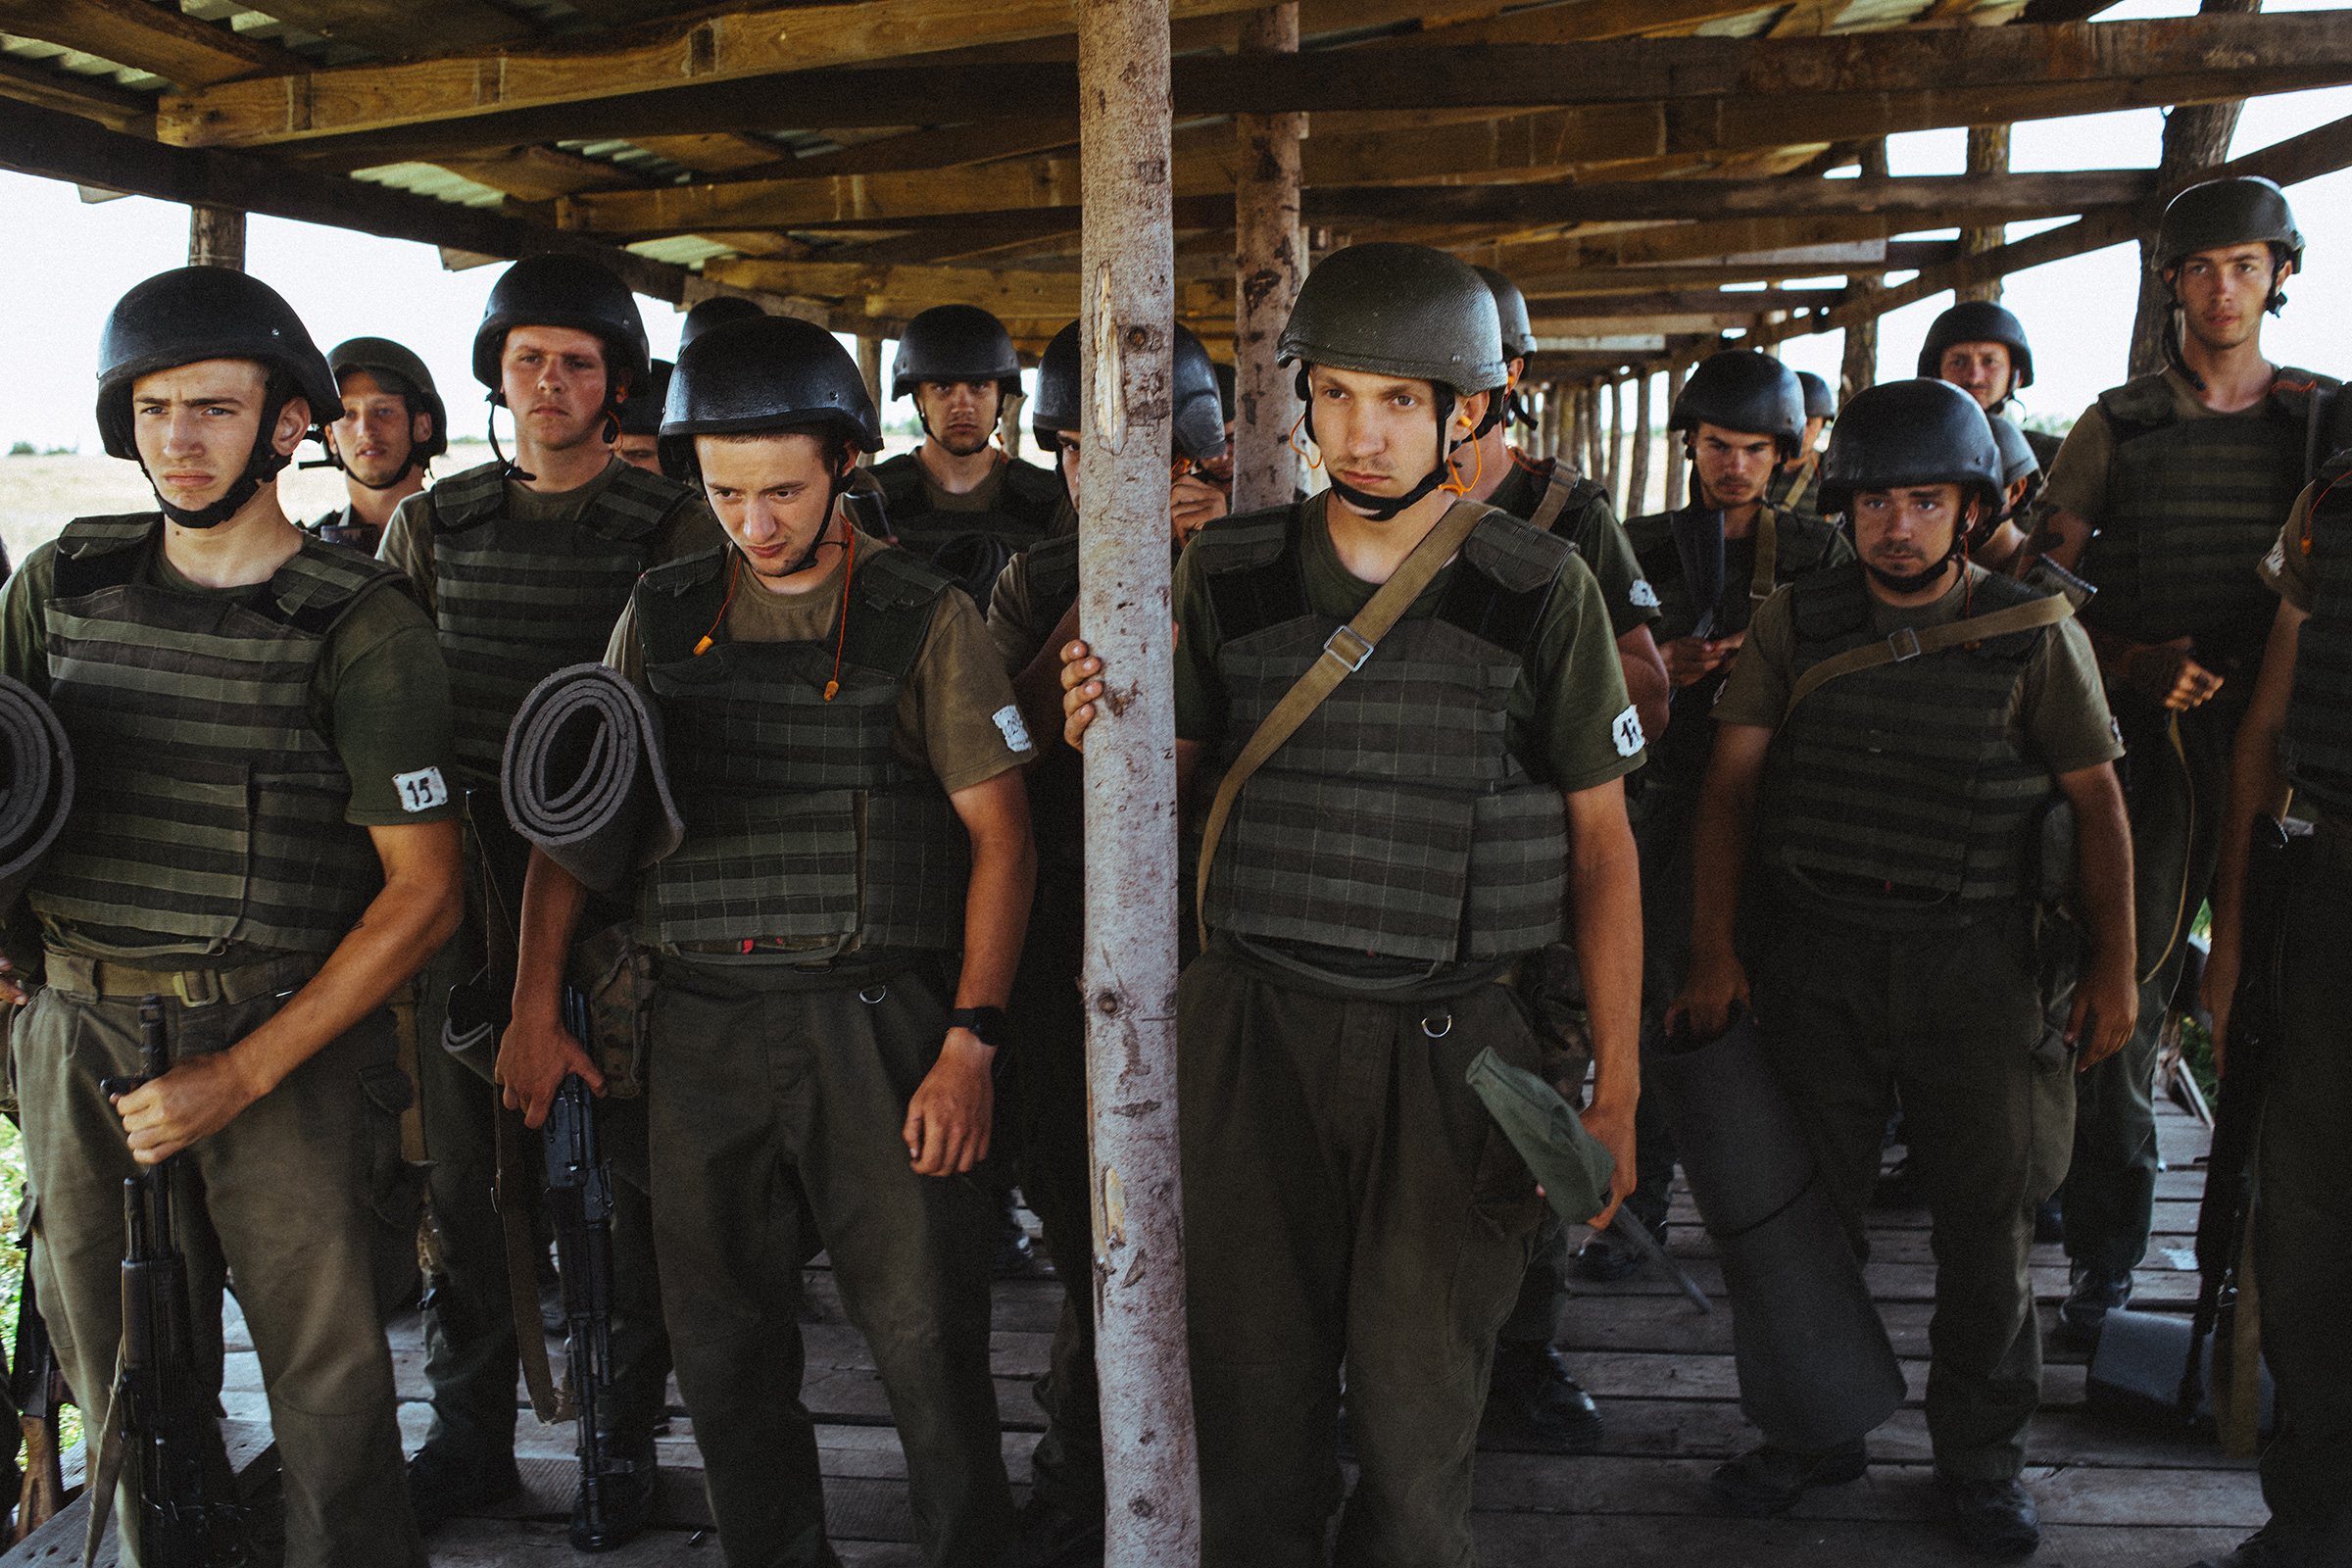 New recruits take part in basic training at one of Azov's bases near the frontline city of Mariupol in eastern Ukraine in August 2019. (Maxim Dondyuk for TIME)